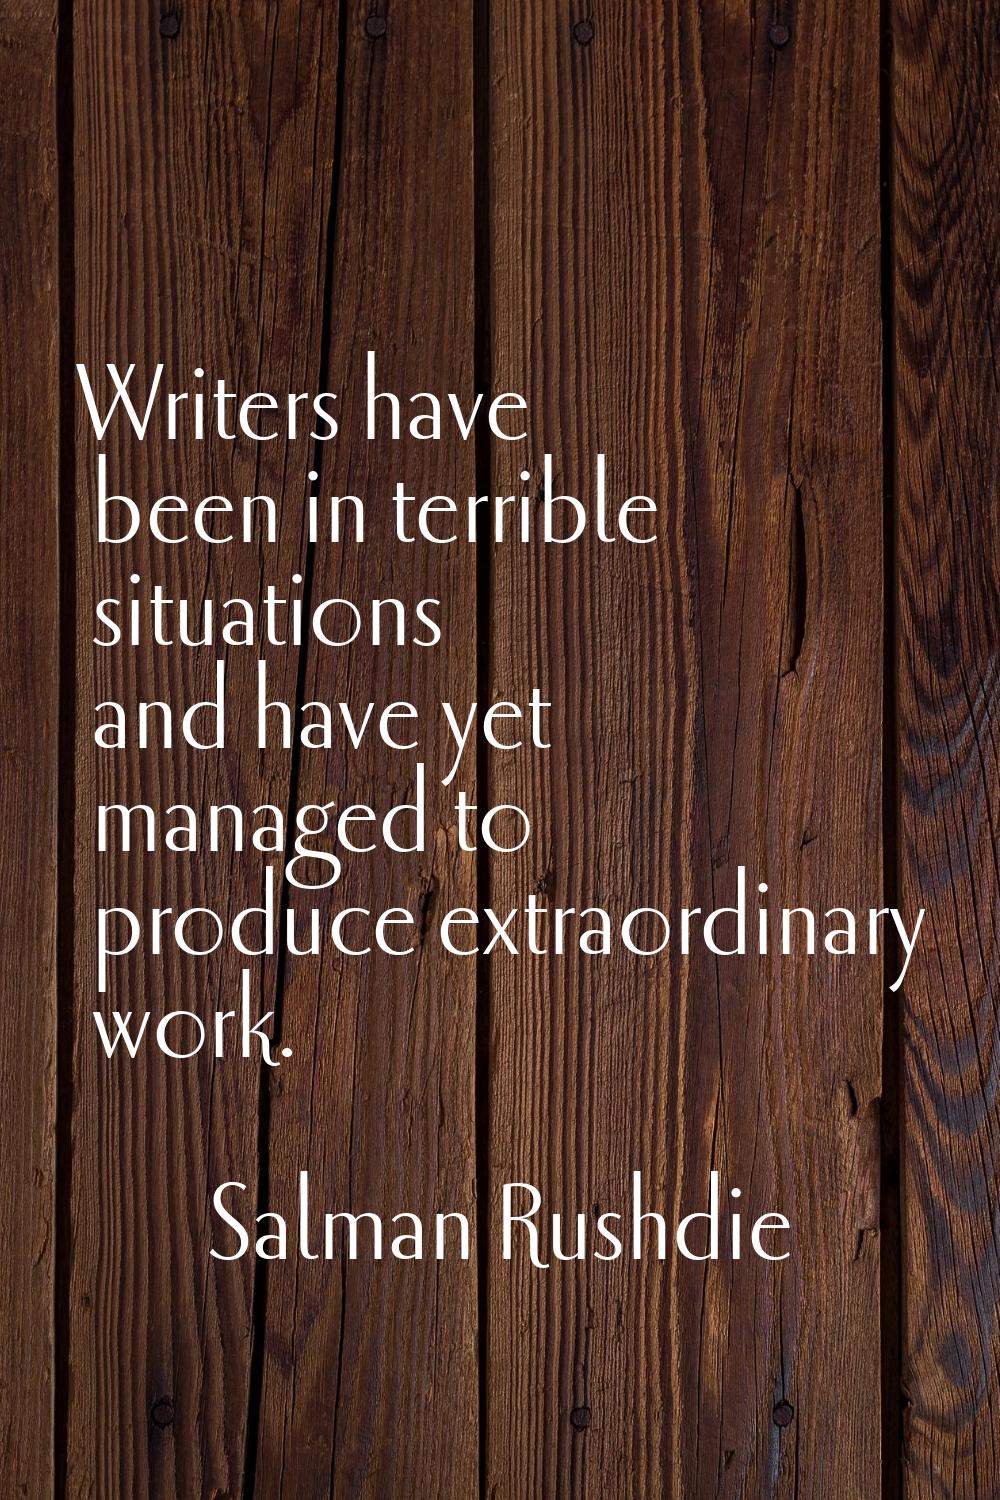 Writers have been in terrible situations and have yet managed to produce extraordinary work.